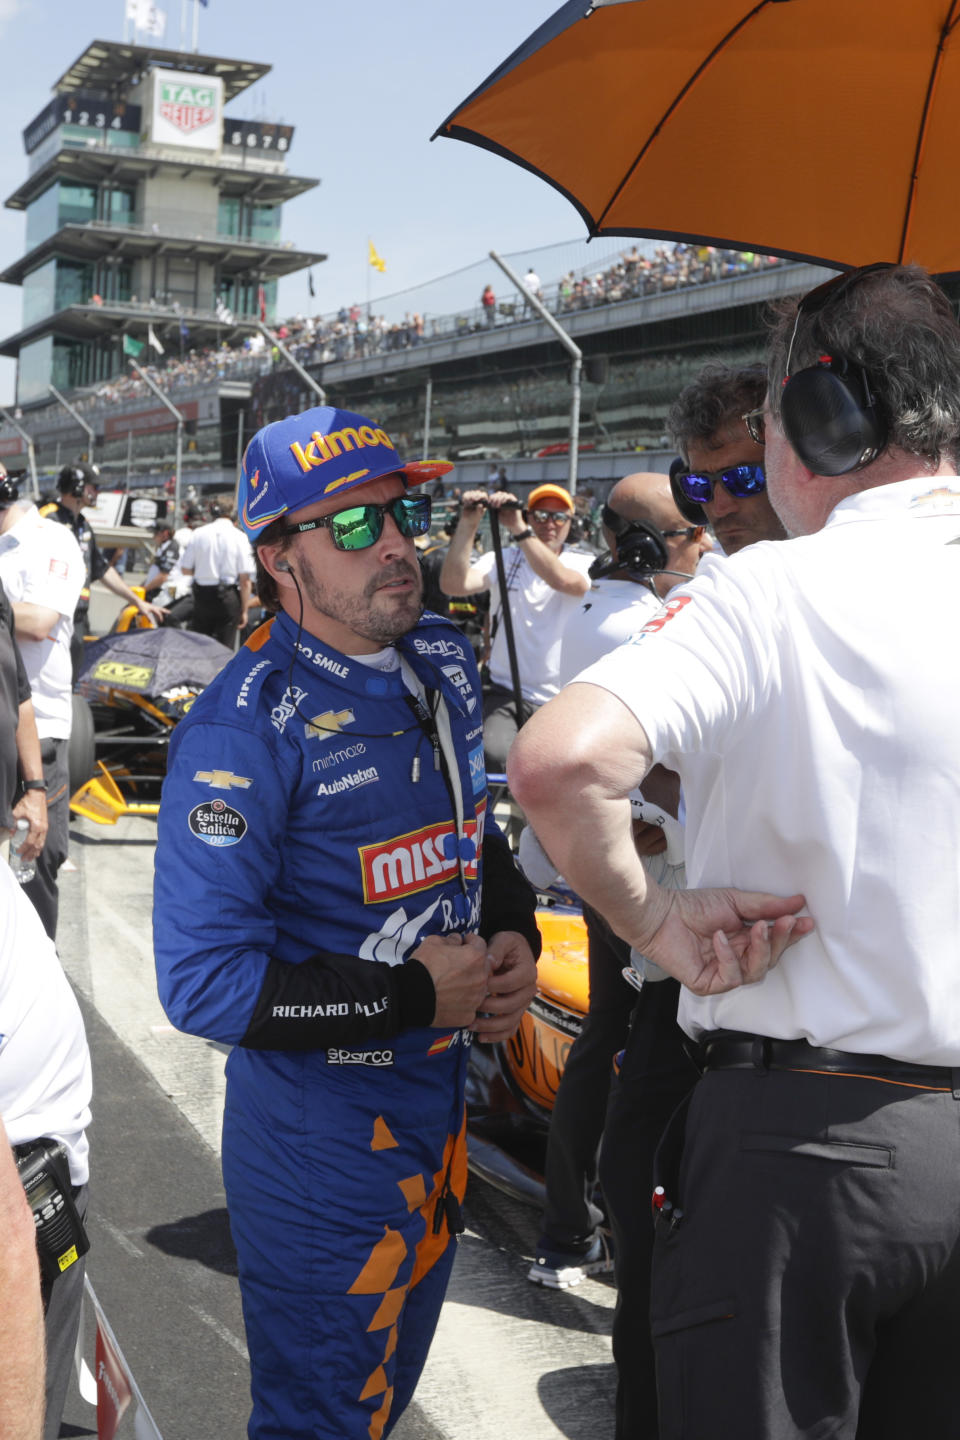 FILE - In this May 18, 2019, file photo, Fernando Alonso, of Spain, talks with his crew as he prepares to qualify for the Indianapolis 500 IndyCar auto race at Indianapolis Motor Speedway in Indianapolis. Alonso will once again attempt to complete motorsports' version of the Triple Crown with a return to the Indianapolis 500 in May with McLaren. (AP Photo/Michael Conroy, File)